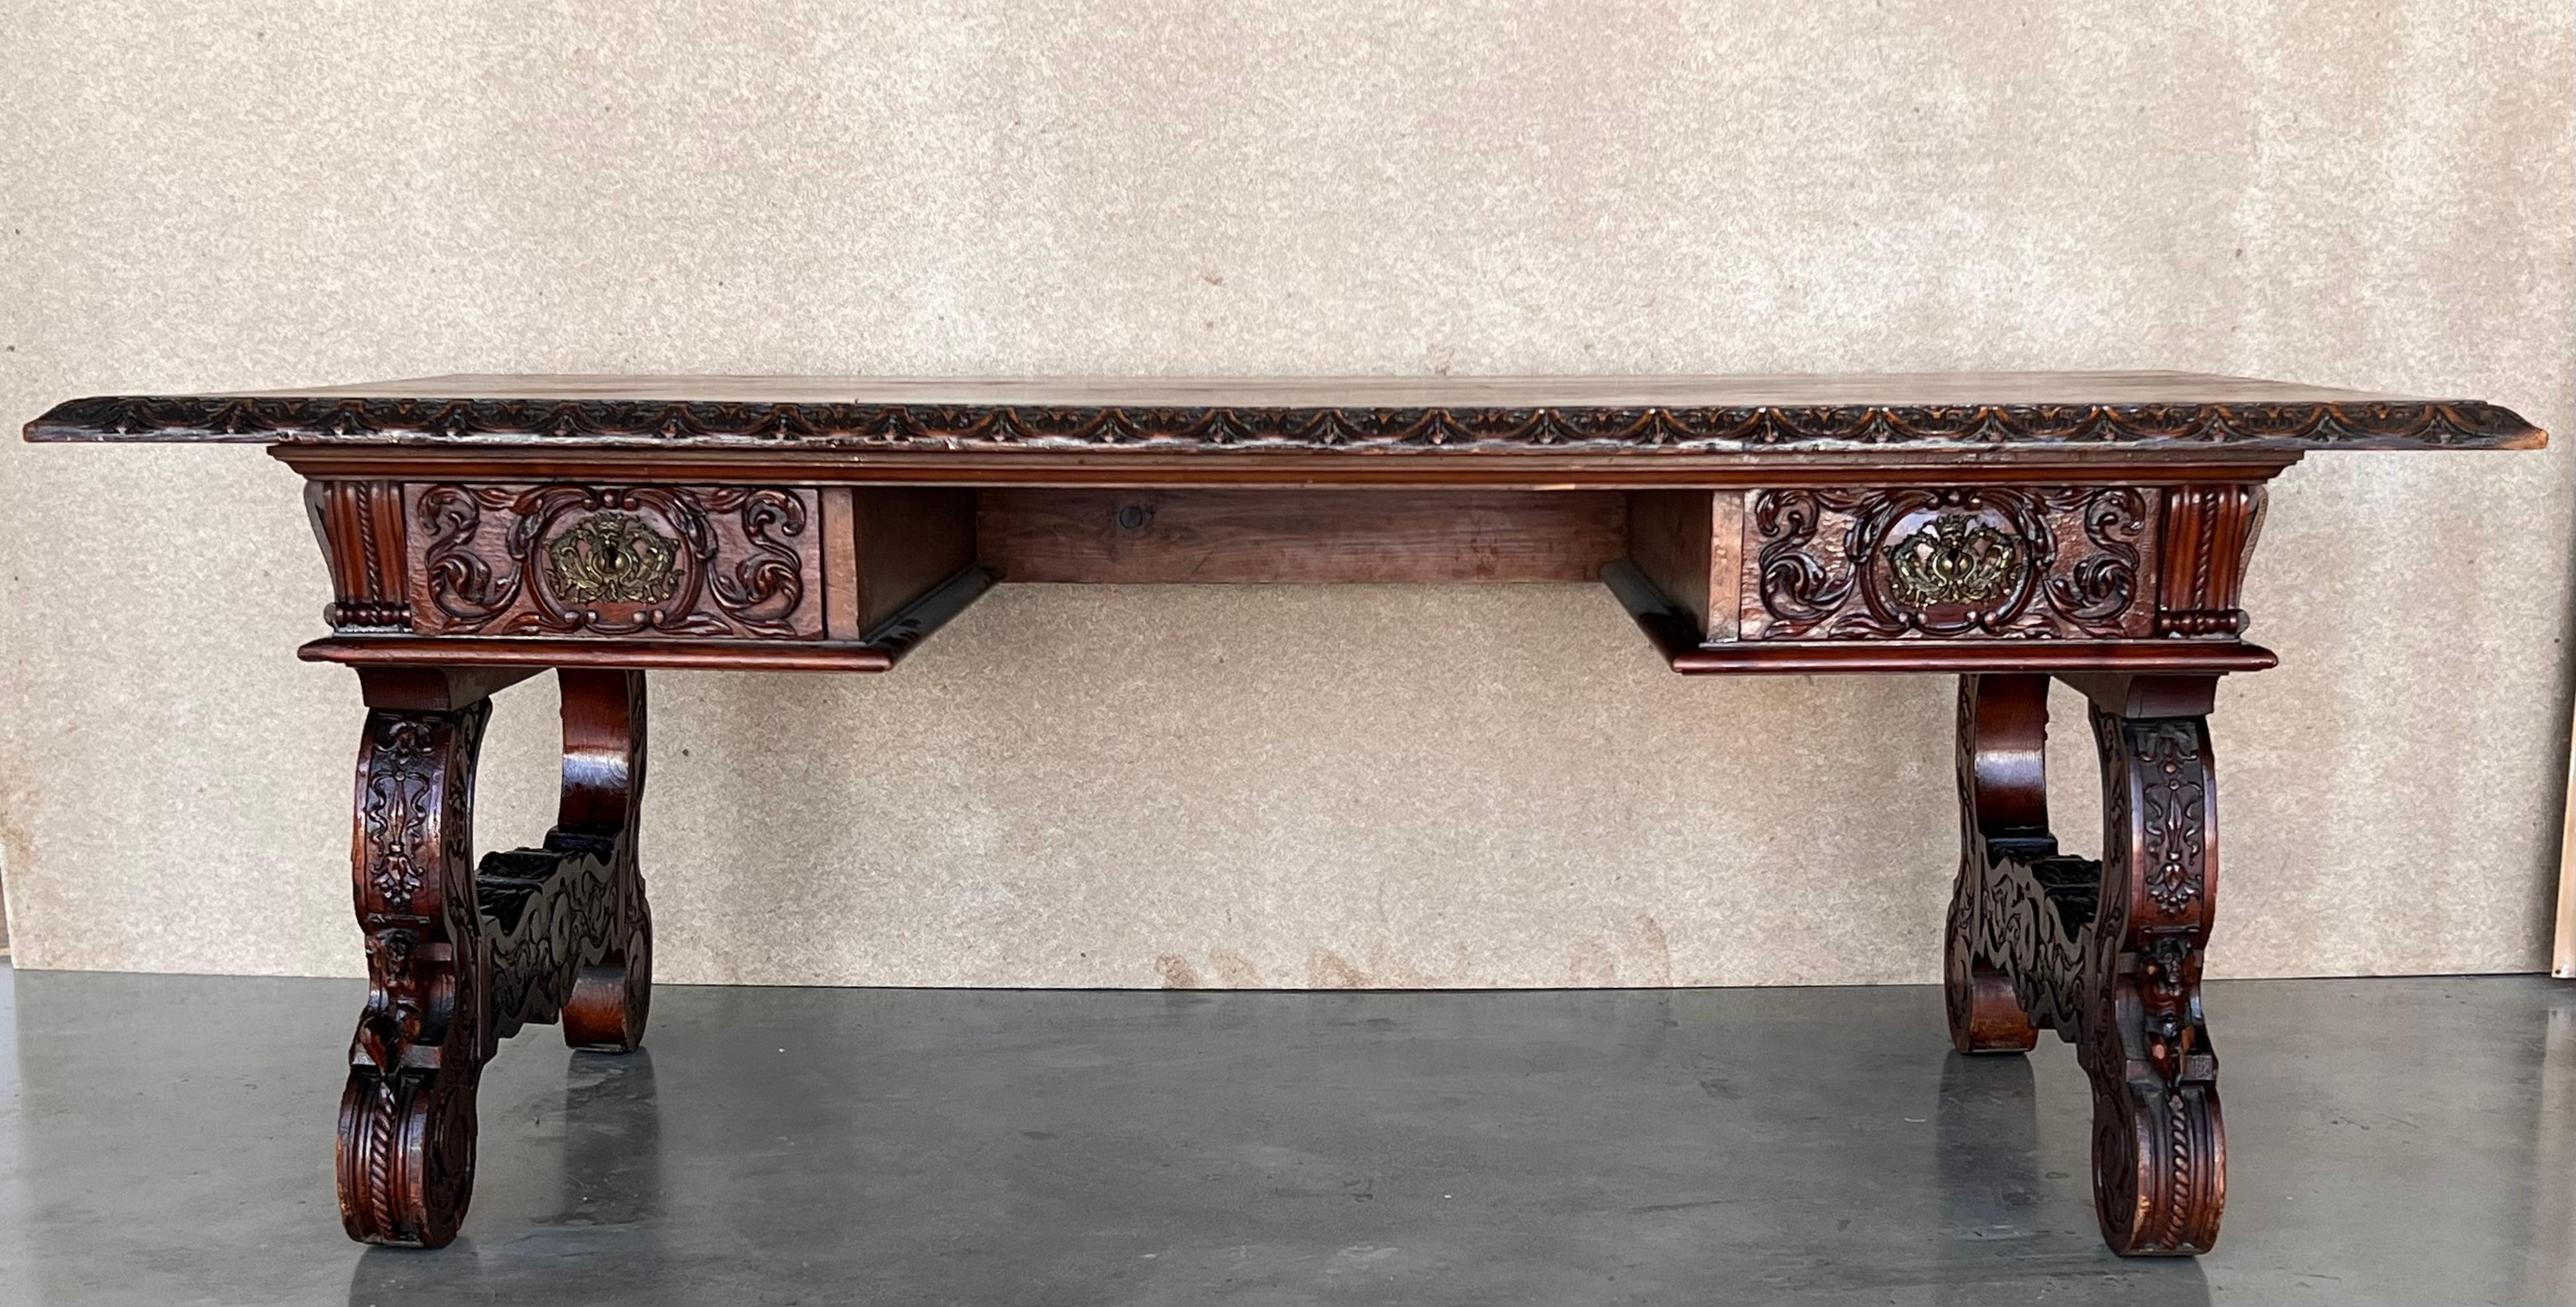 In grand, gothic style, this Spanish library / writing table has a deeply carved edge and this is just the tip of the proverbial iceberg, as the carving never really stops. It goes on from the frieze, down along the shaped lyre legs and continues to